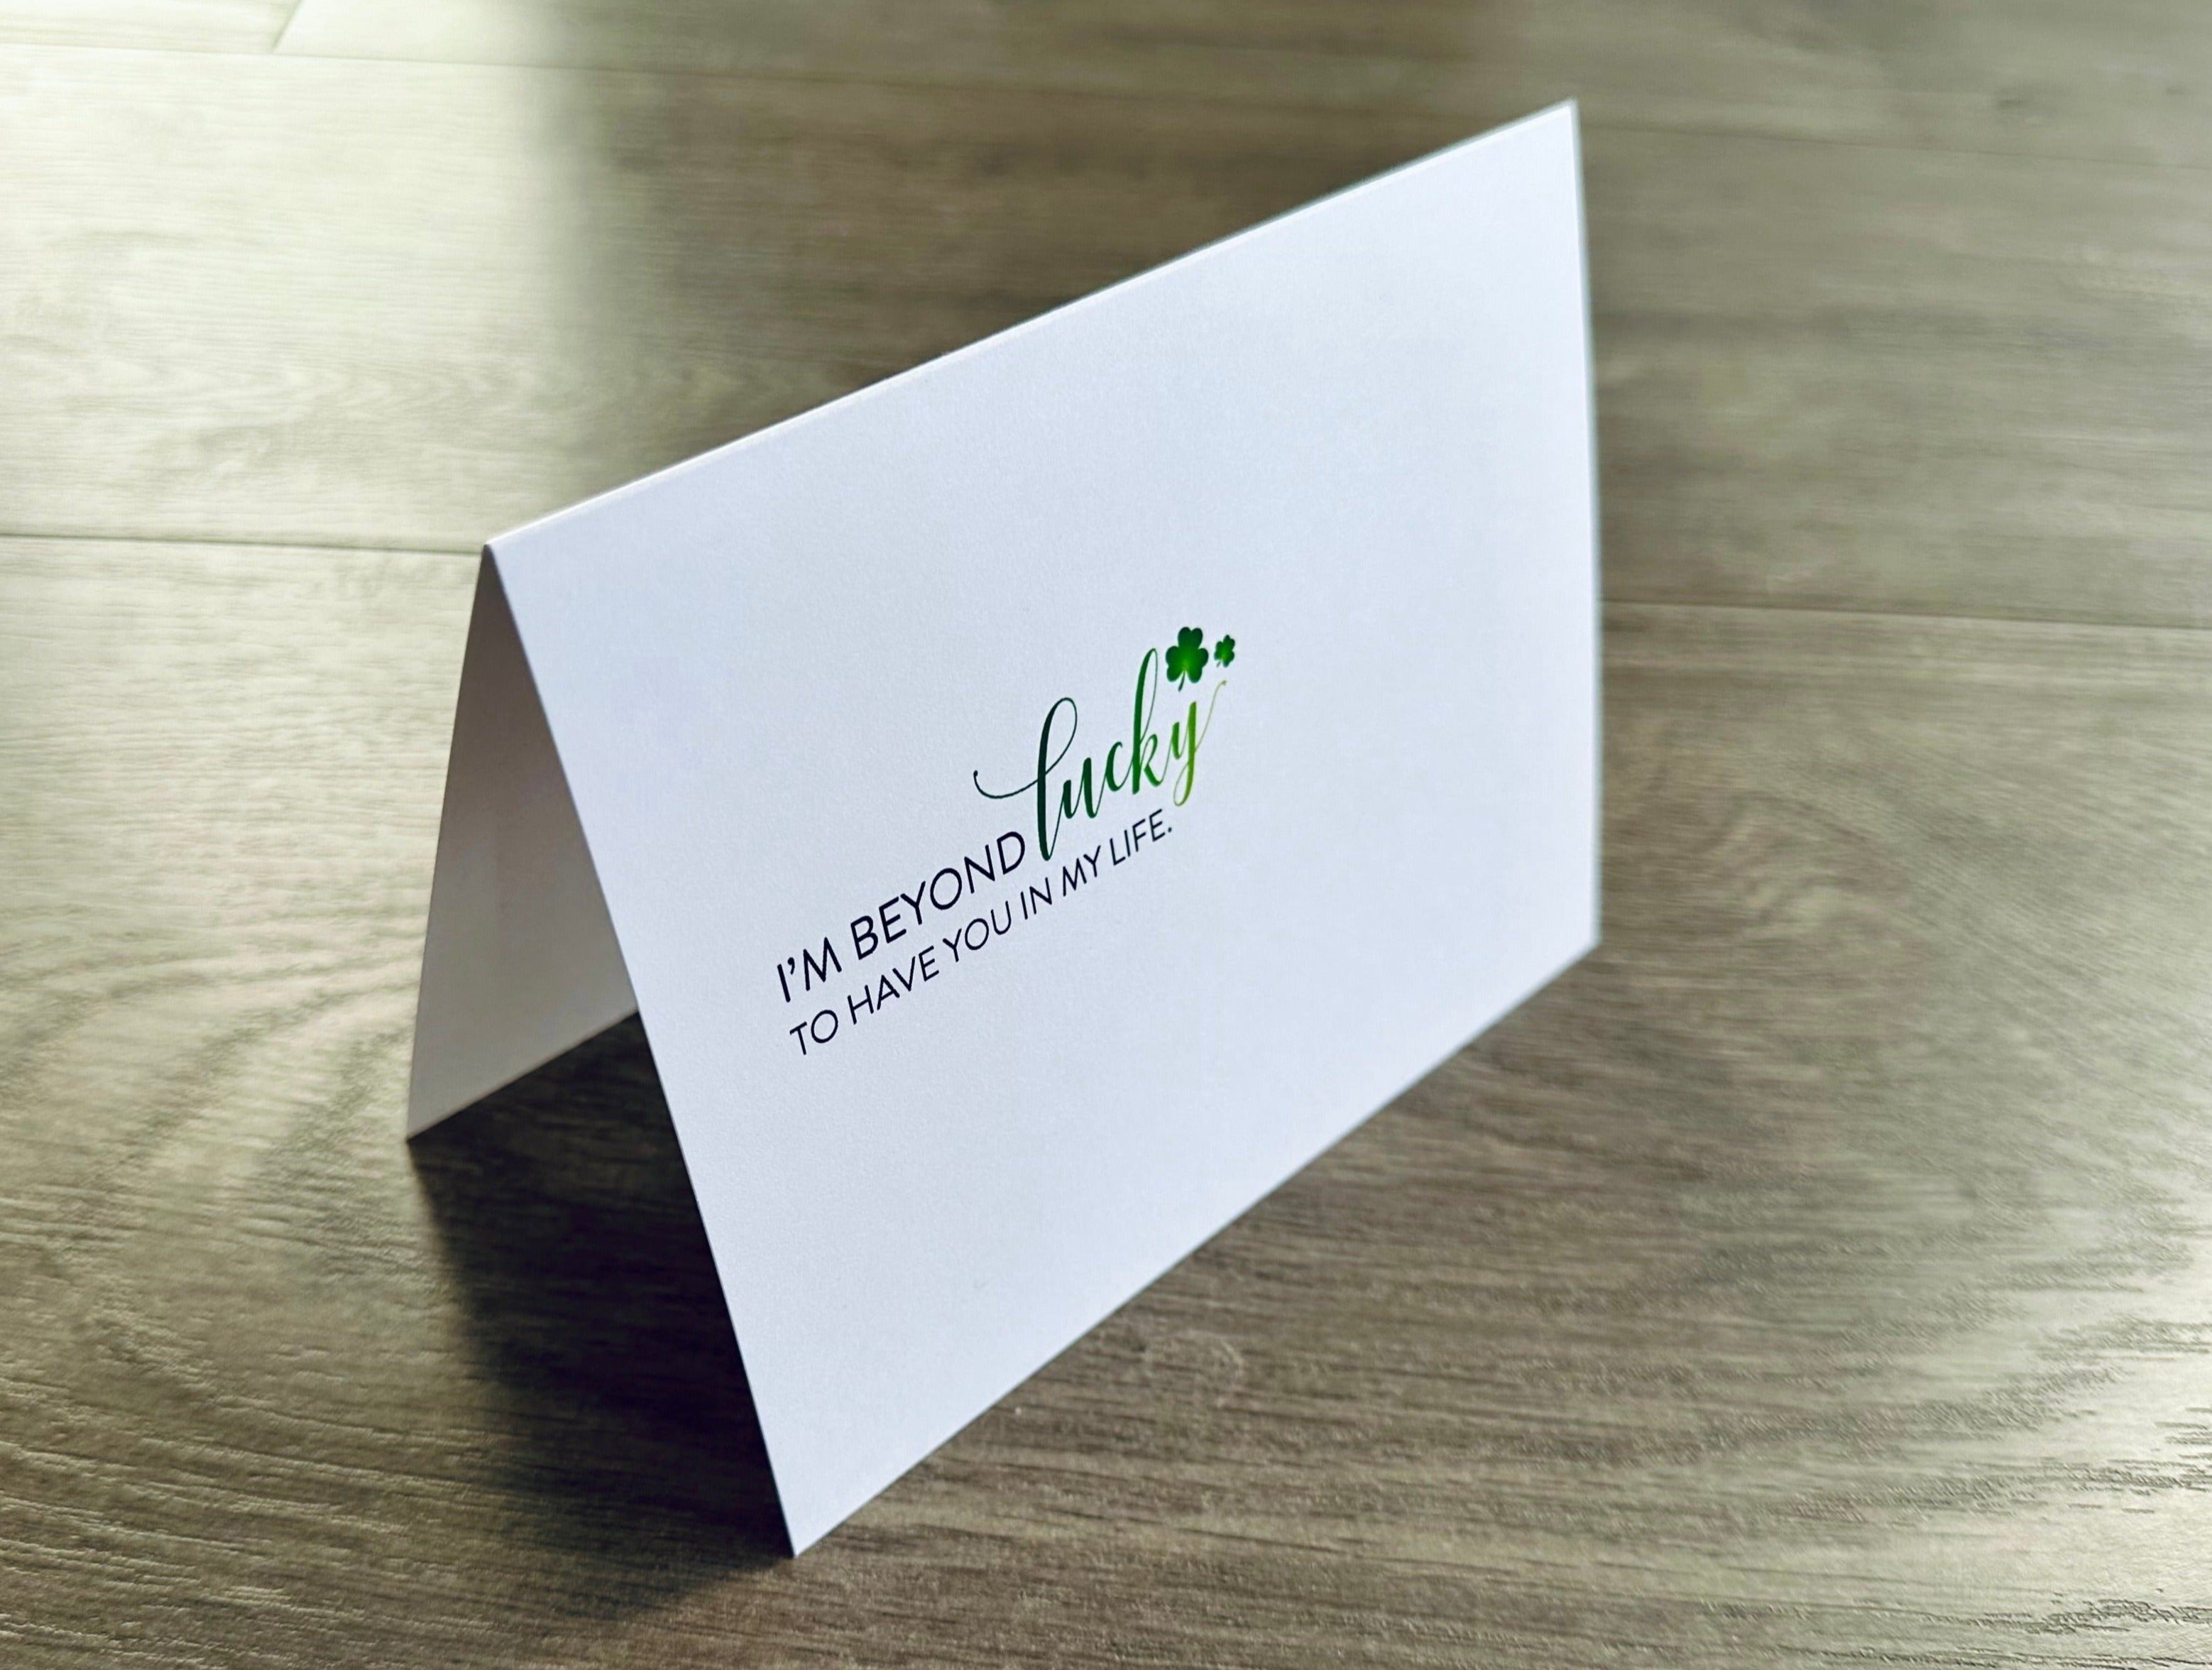 A folded white notecard says "I'm beyond lucky to have you in my life" on the front with two small green shamrocks. Friendship Luck by Stationare.